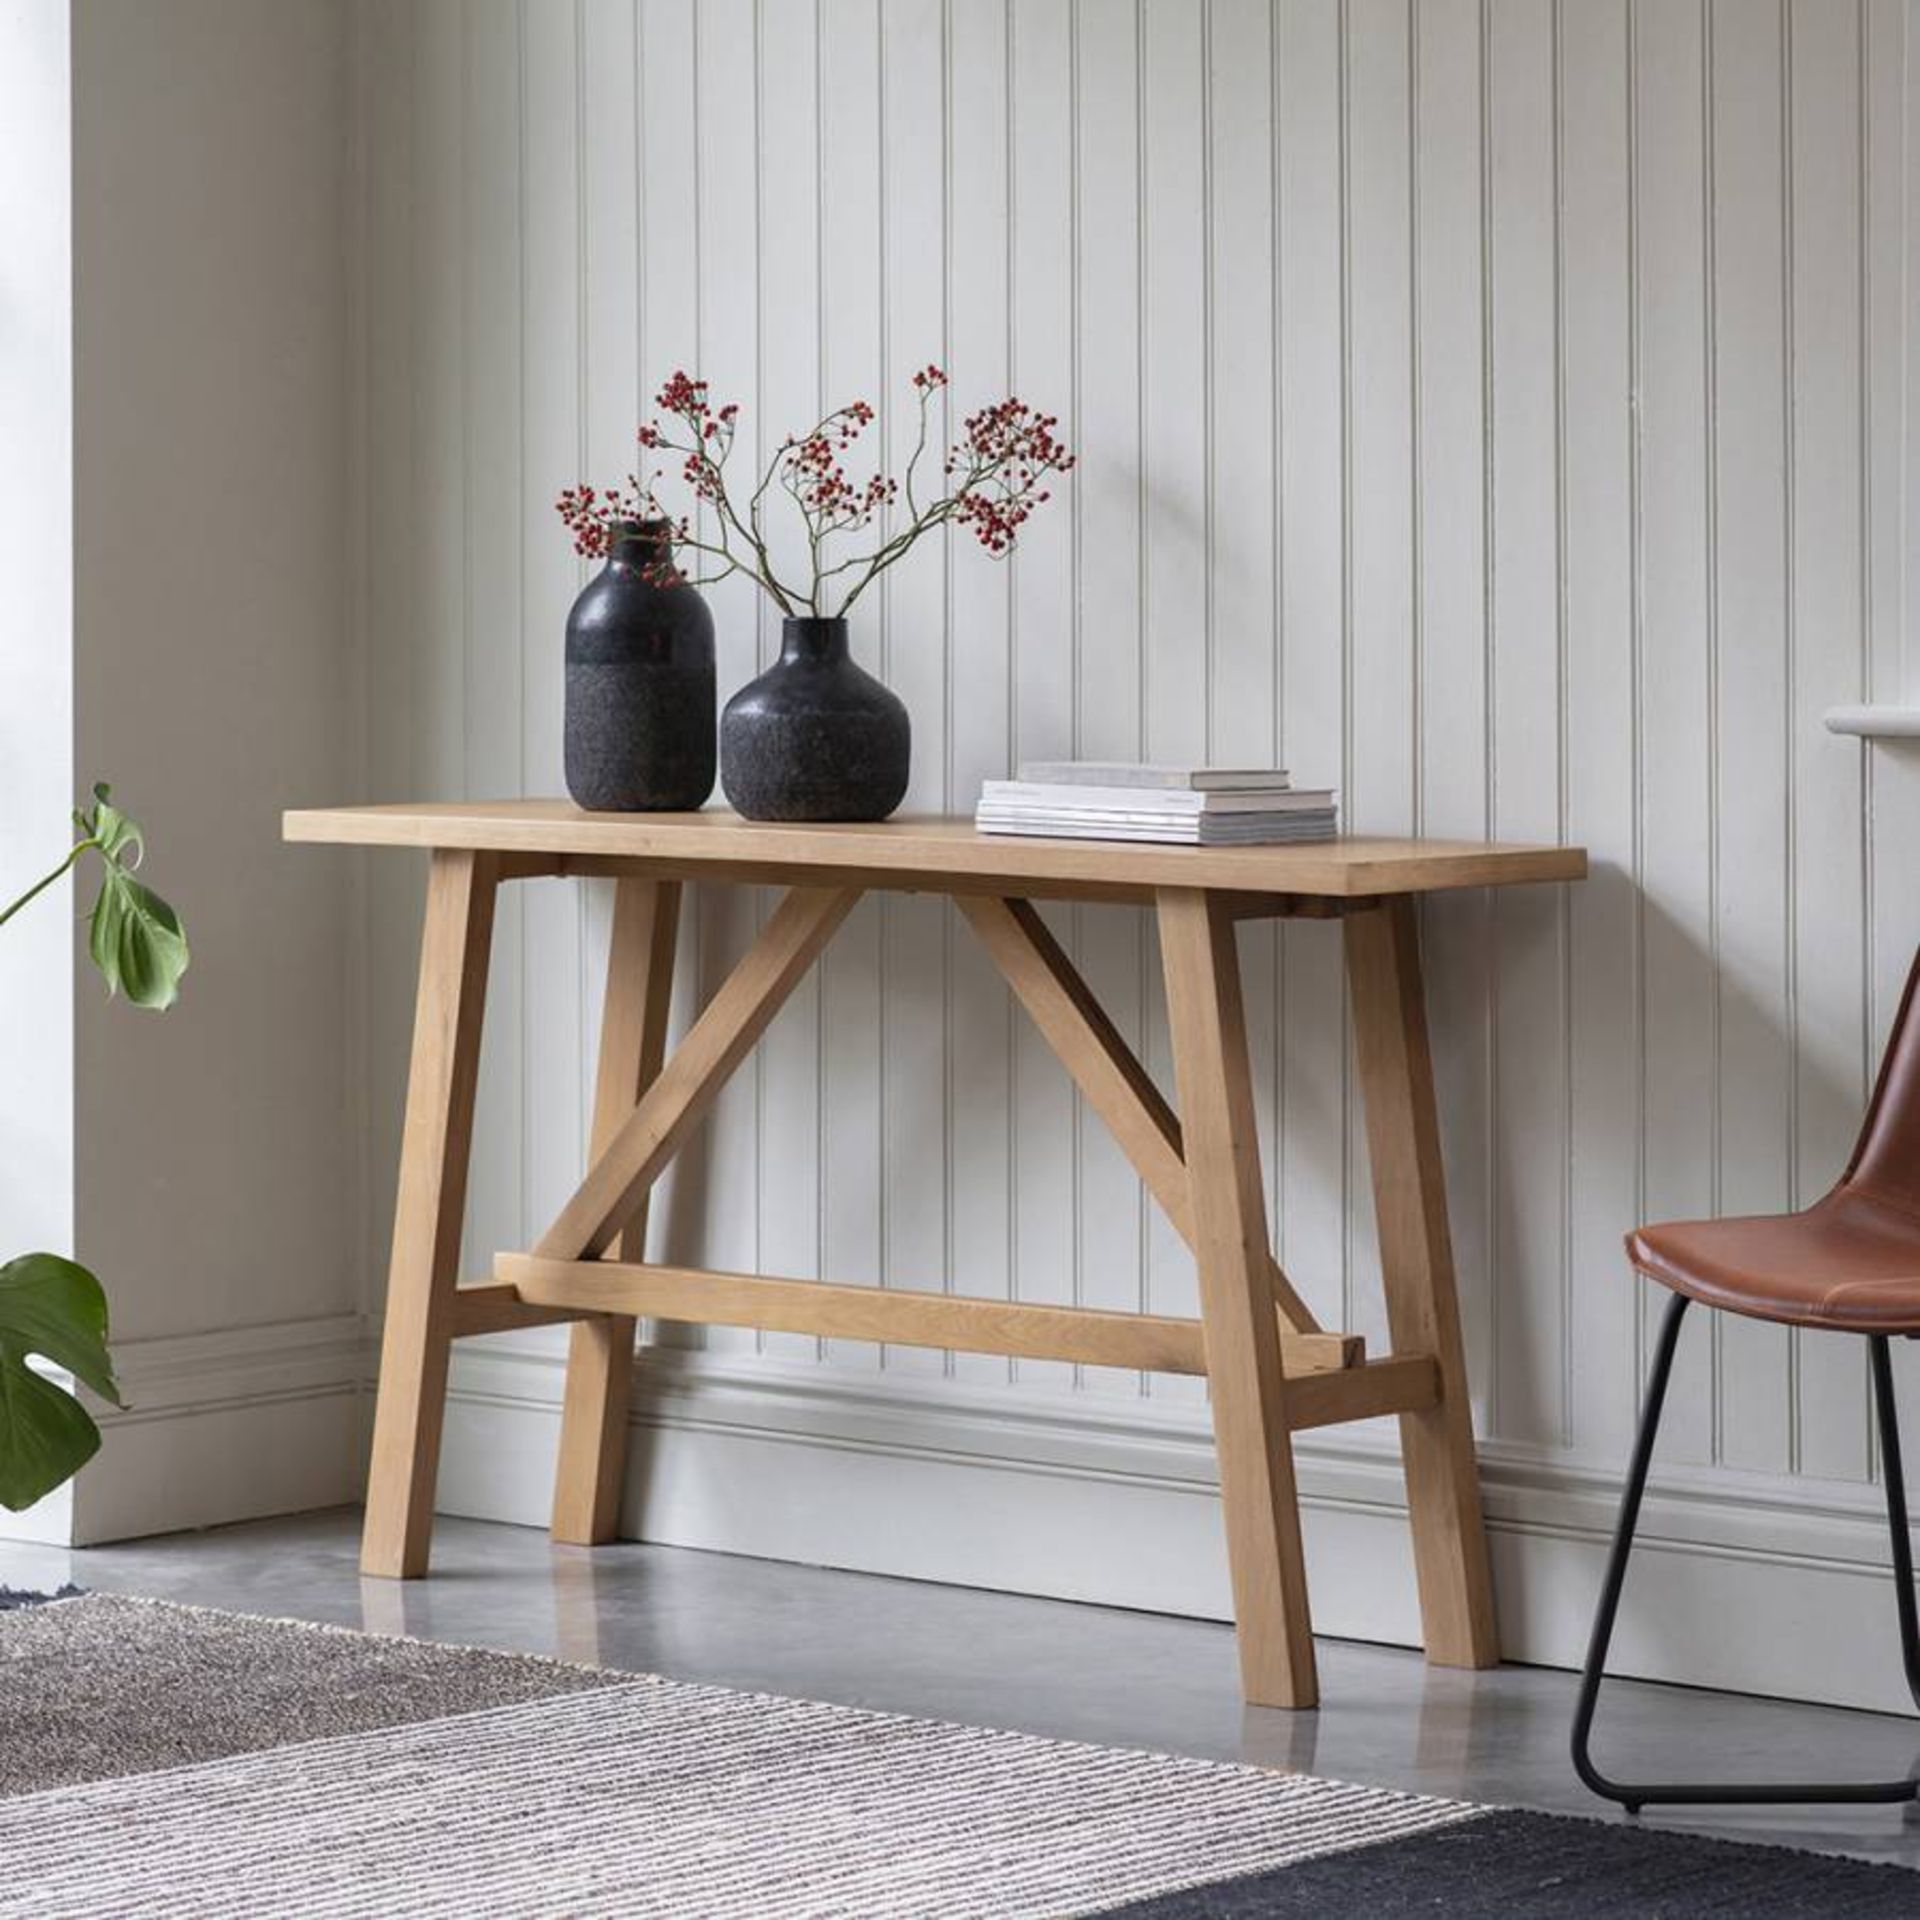 Clapham Console Table Oak With a mixture of vaneer and oak, the Clapham range offers robust pieces